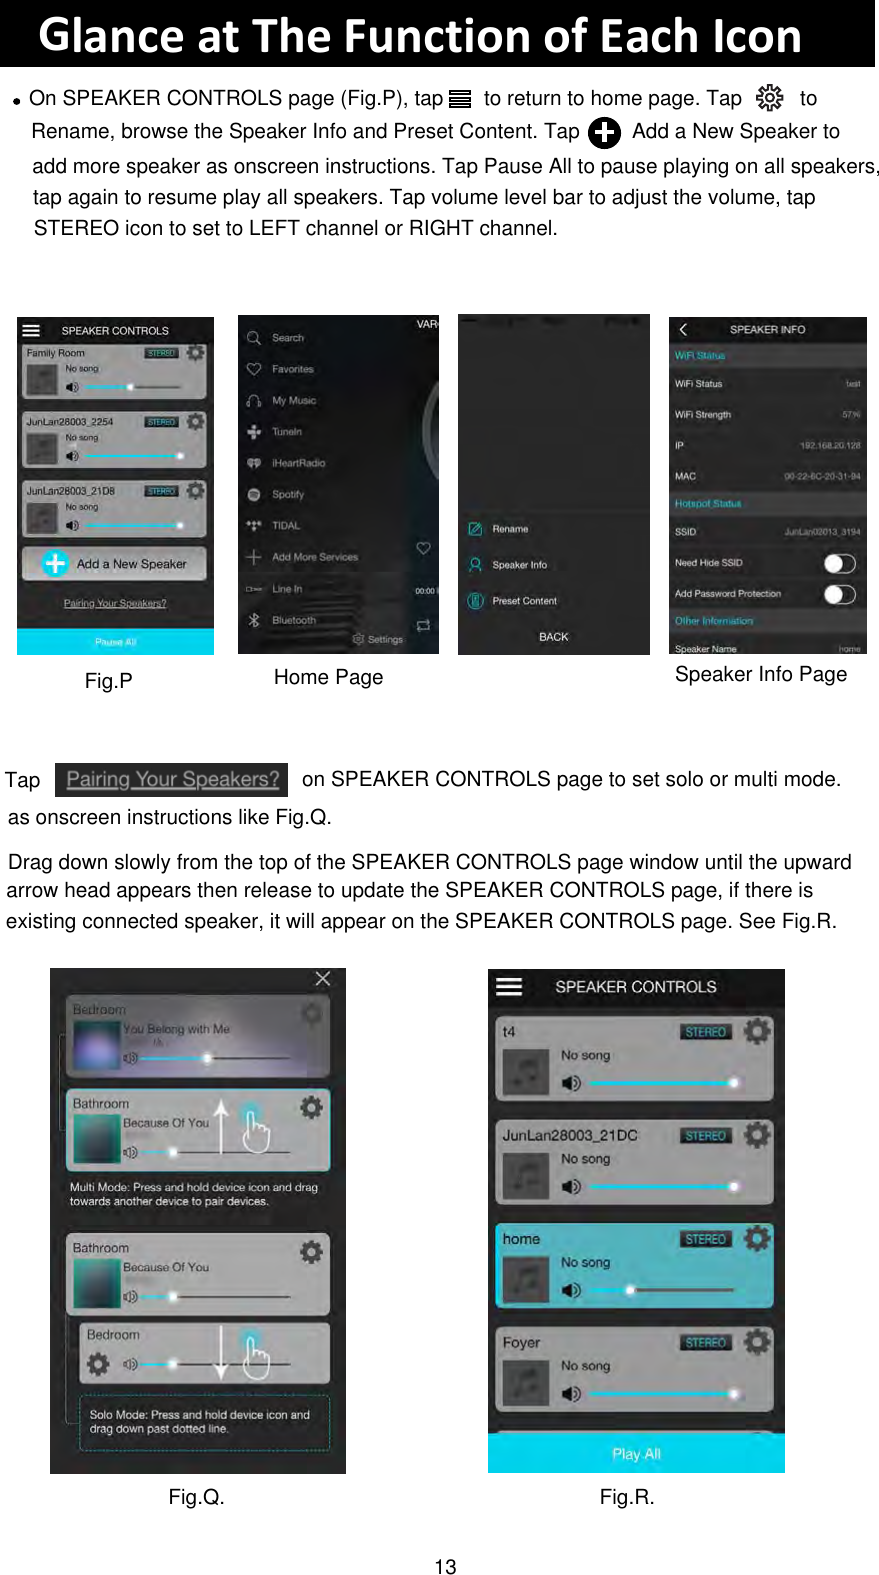 Glance at The Function of Each Icon On SPEAKER CONTROLS page (Fig.P), tap       to return to home page. Tap          to  Fig.PRename, browse the Speaker Info and Preset Content. Tap         Add a New Speaker toadd more speaker as onscreen instructions. Tap Pause All to pause playing on all speakers, tap again to resume play all speakers. Tap volume level bar to adjust the volume, tap Home Page Speaker Info PageSTEREO icon to set to LEFT channel or RIGHT channel.Tap  on SPEAKER CONTROLS page to set solo or multi mode. as onscreen instructions like Fig.Q. Fig.Q.  Fig.R. Drag down slowly from the top of the SPEAKER CONTROLS page window until the upward arrow head appears then release to update the SPEAKER CONTROLS page, if there is  existing connected speaker, it will appear on the SPEAKER CONTROLS page. See Fig.R.13